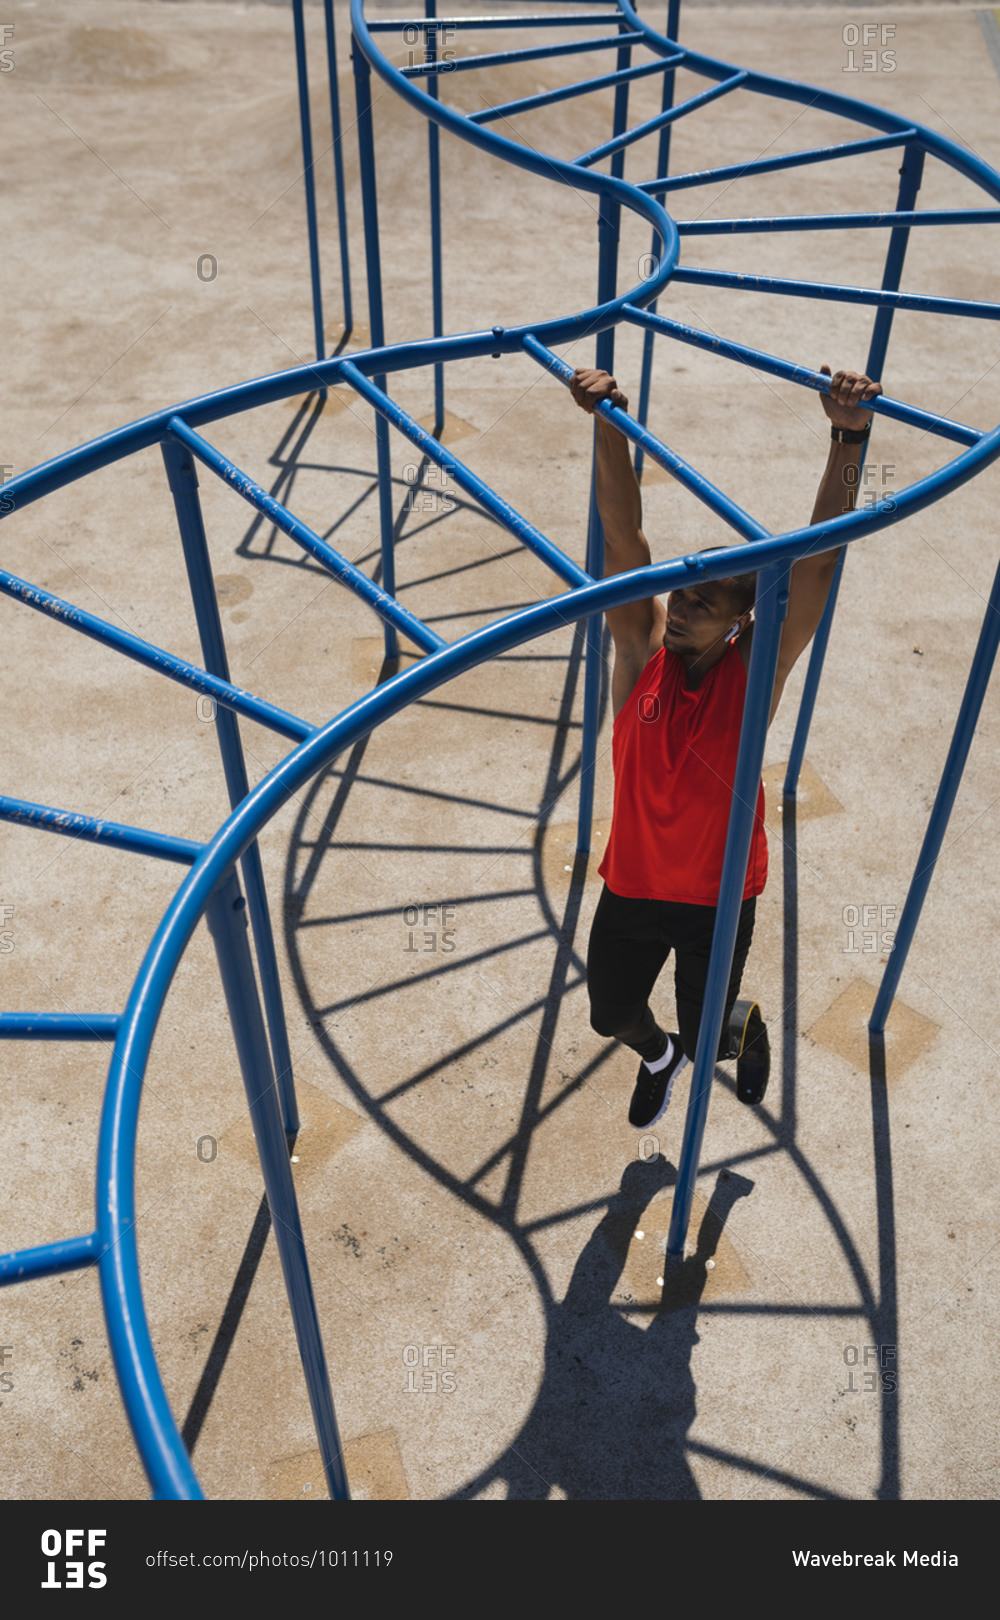 Disabled mixed race man with a prosthetic running blade exercising at an outdoor gym by the coast, wearing wireless earphones, working out on the monkey bars. Fitness disability healthy lifestyle.